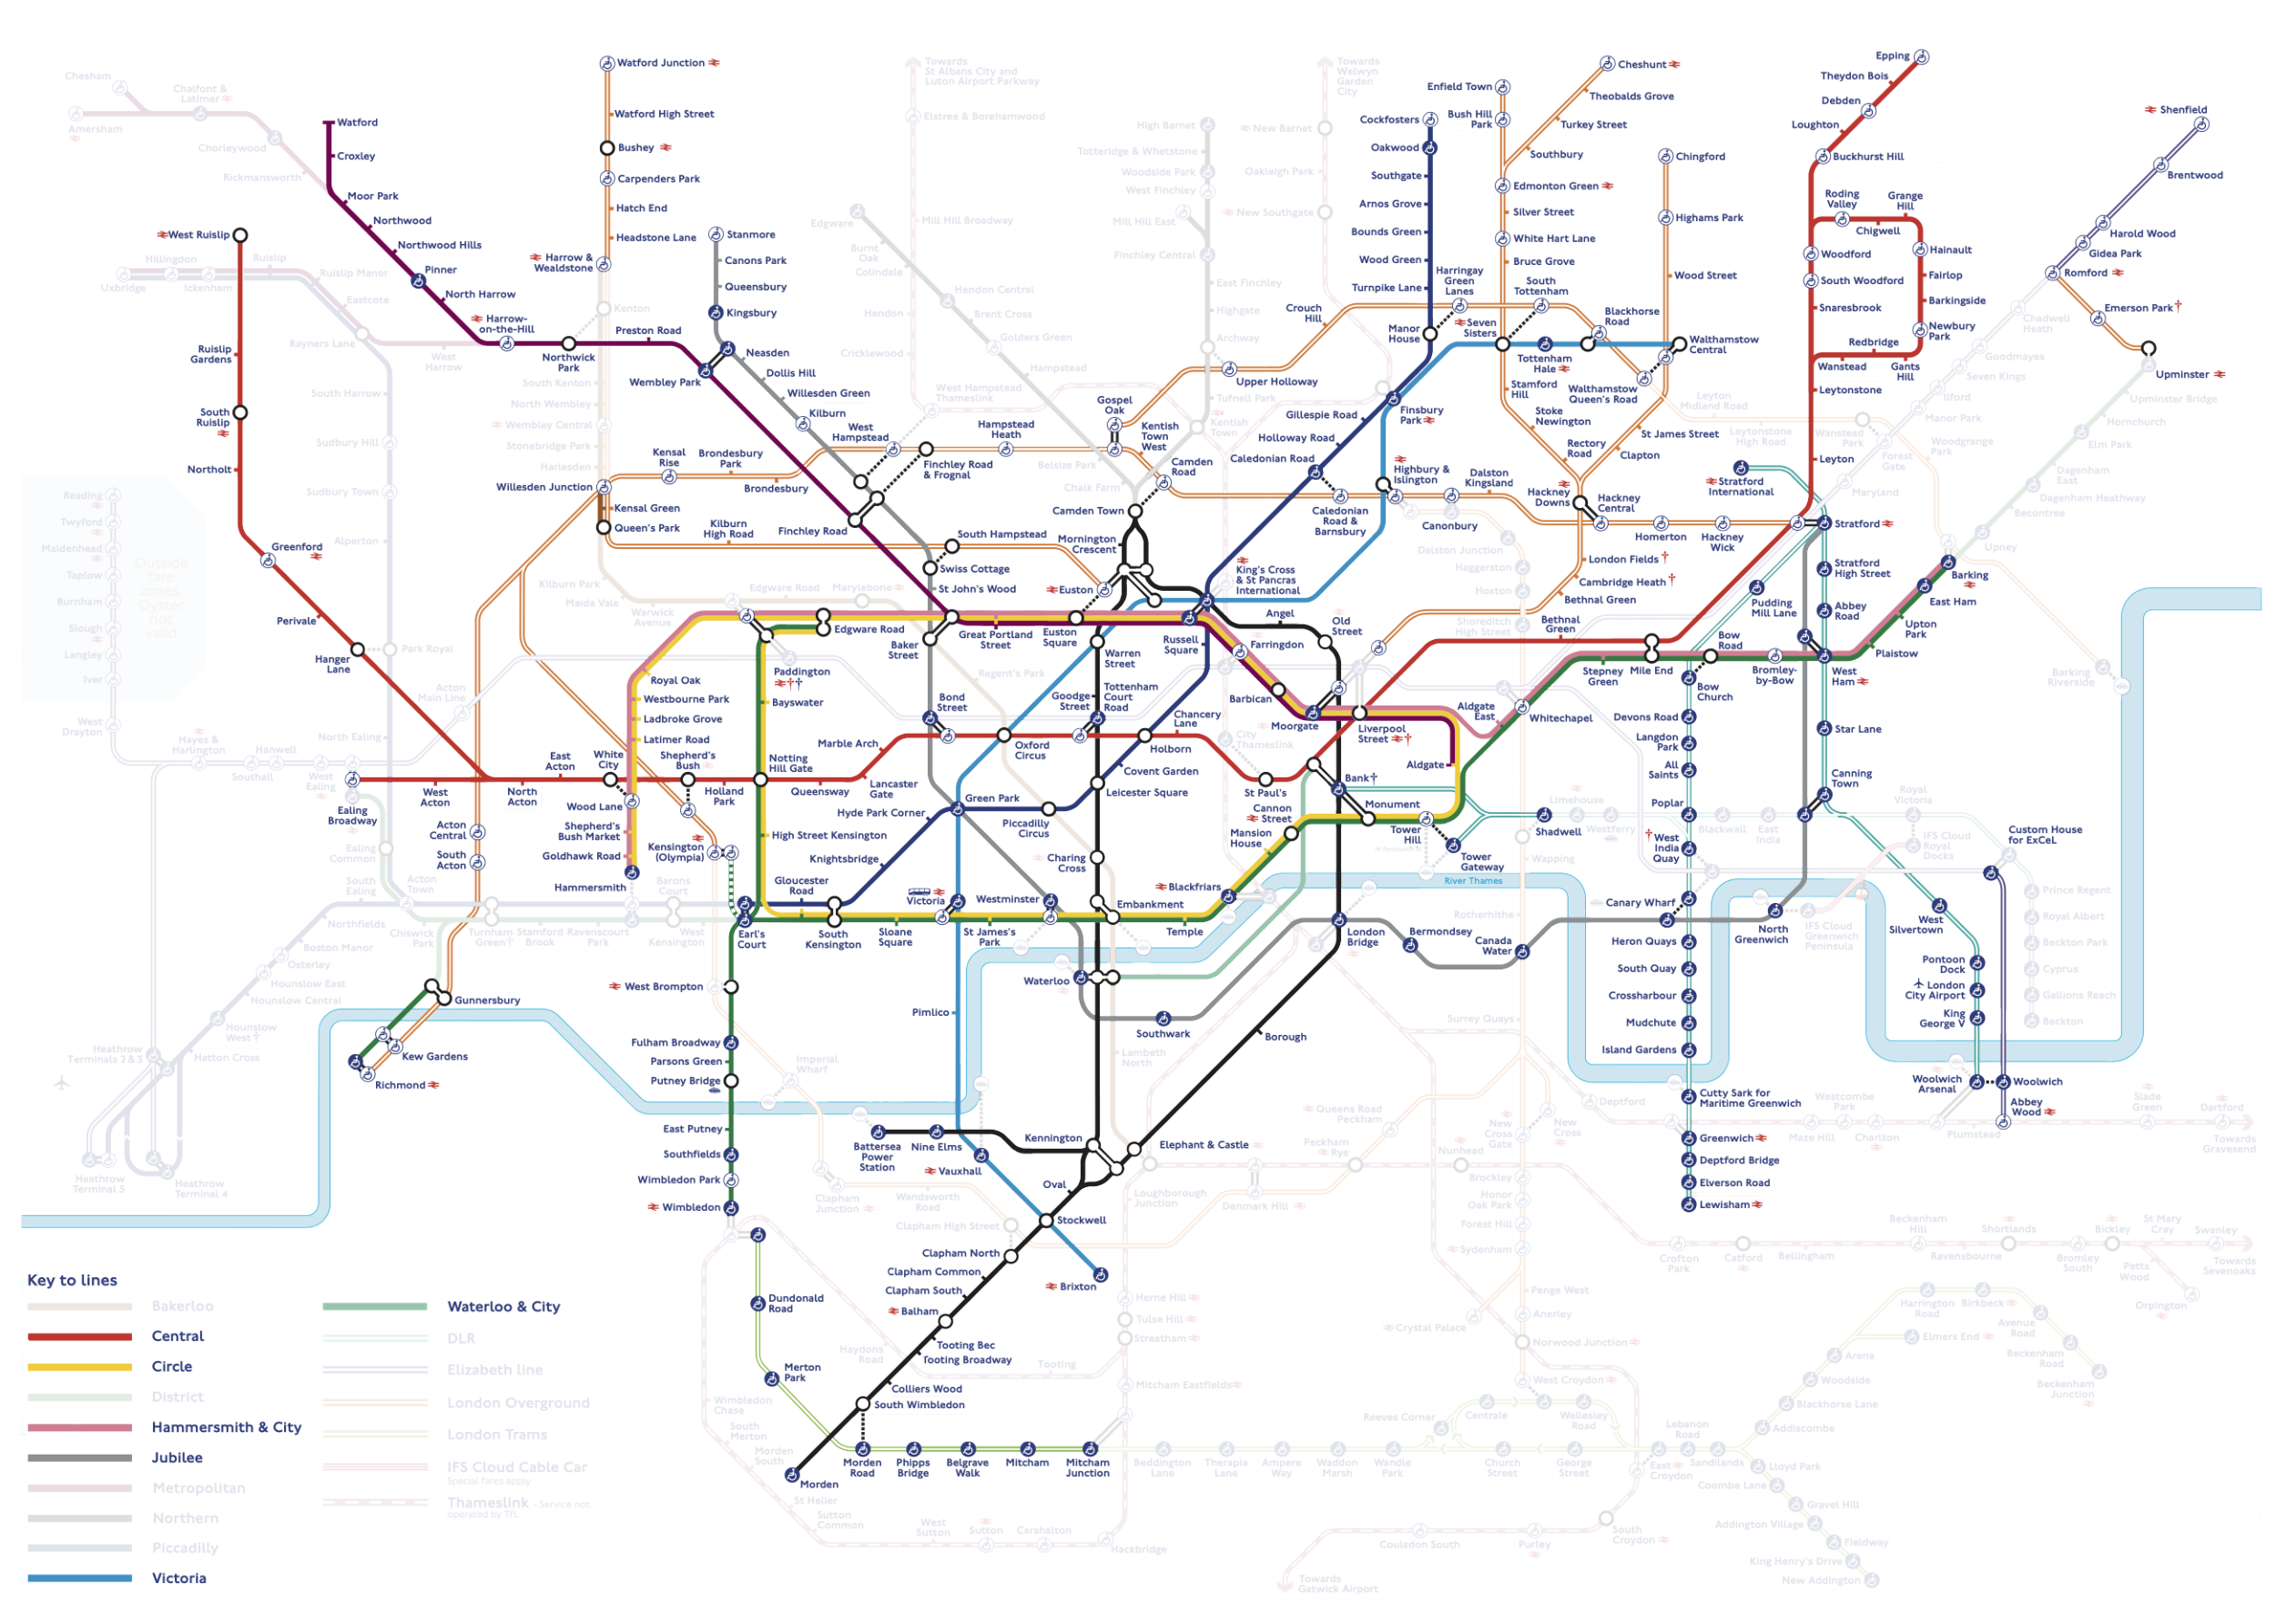 A map showing all the parts of the TfL map that I've walked so far this year.